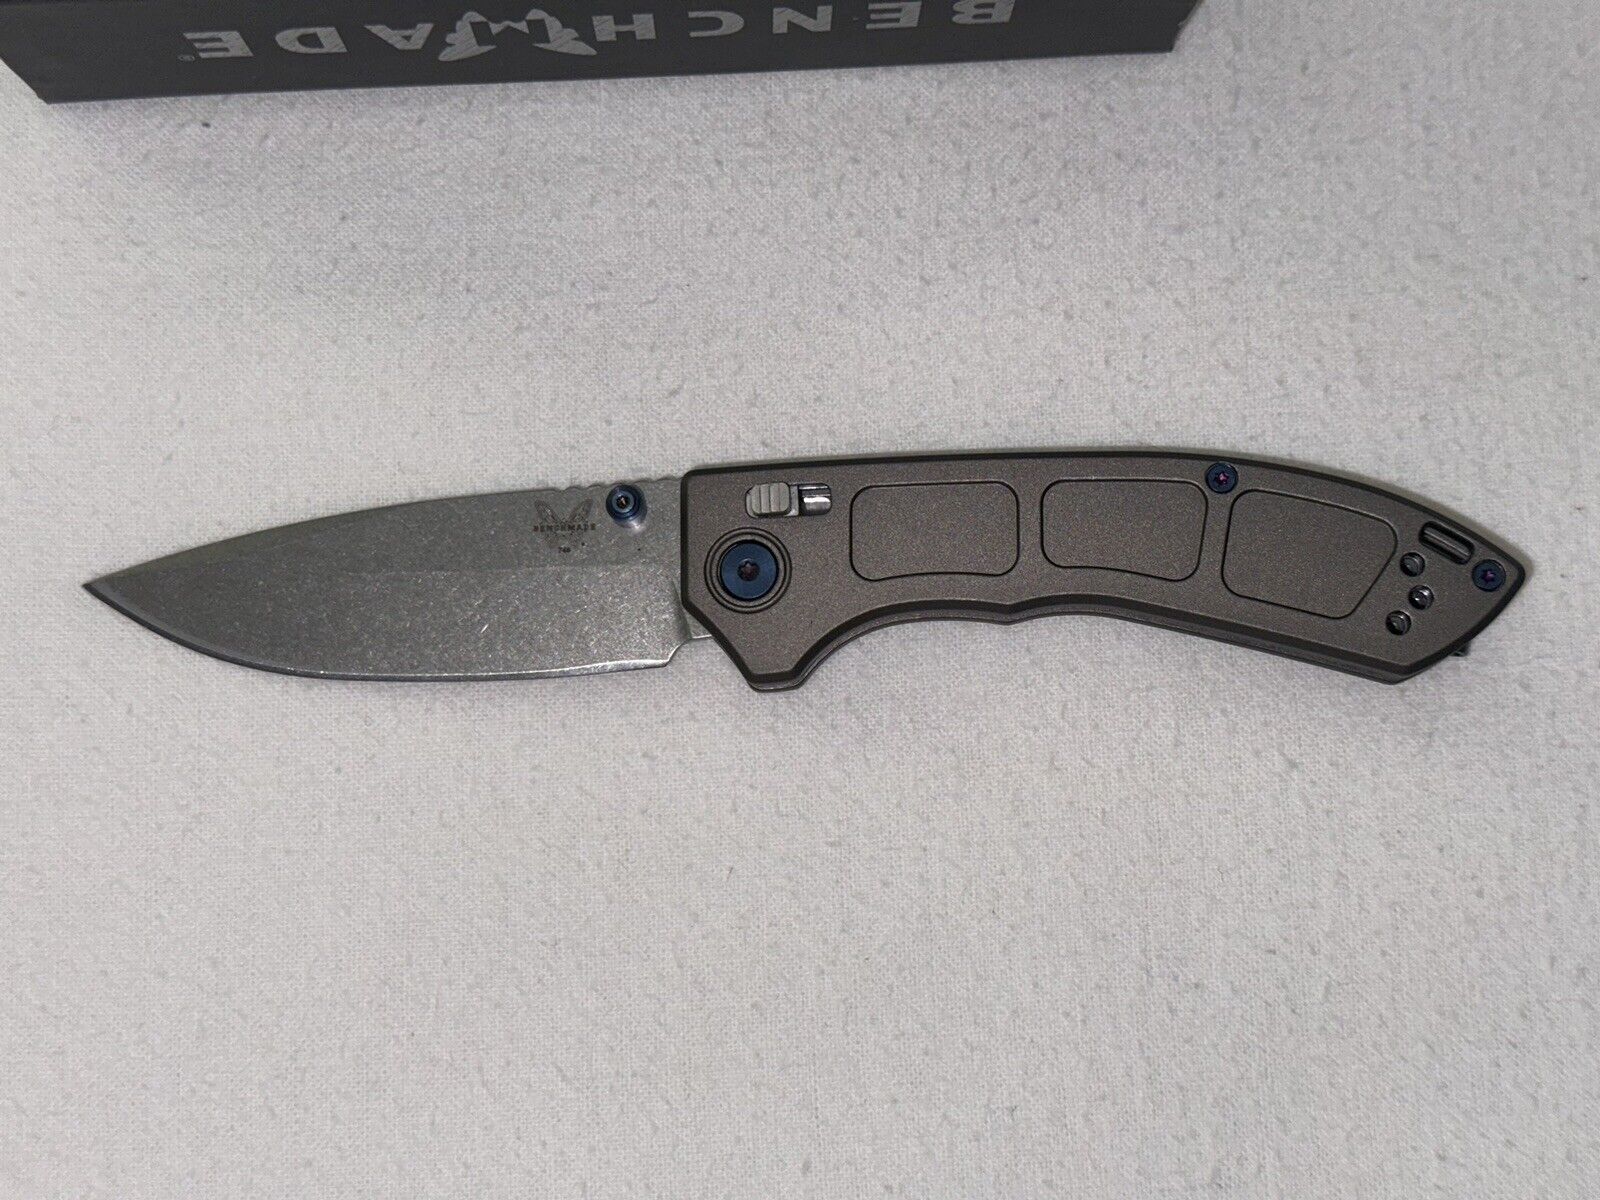 Benchmade 748 Narrows Axis Lock Knife Thin Titanium Handle M390 Stainless